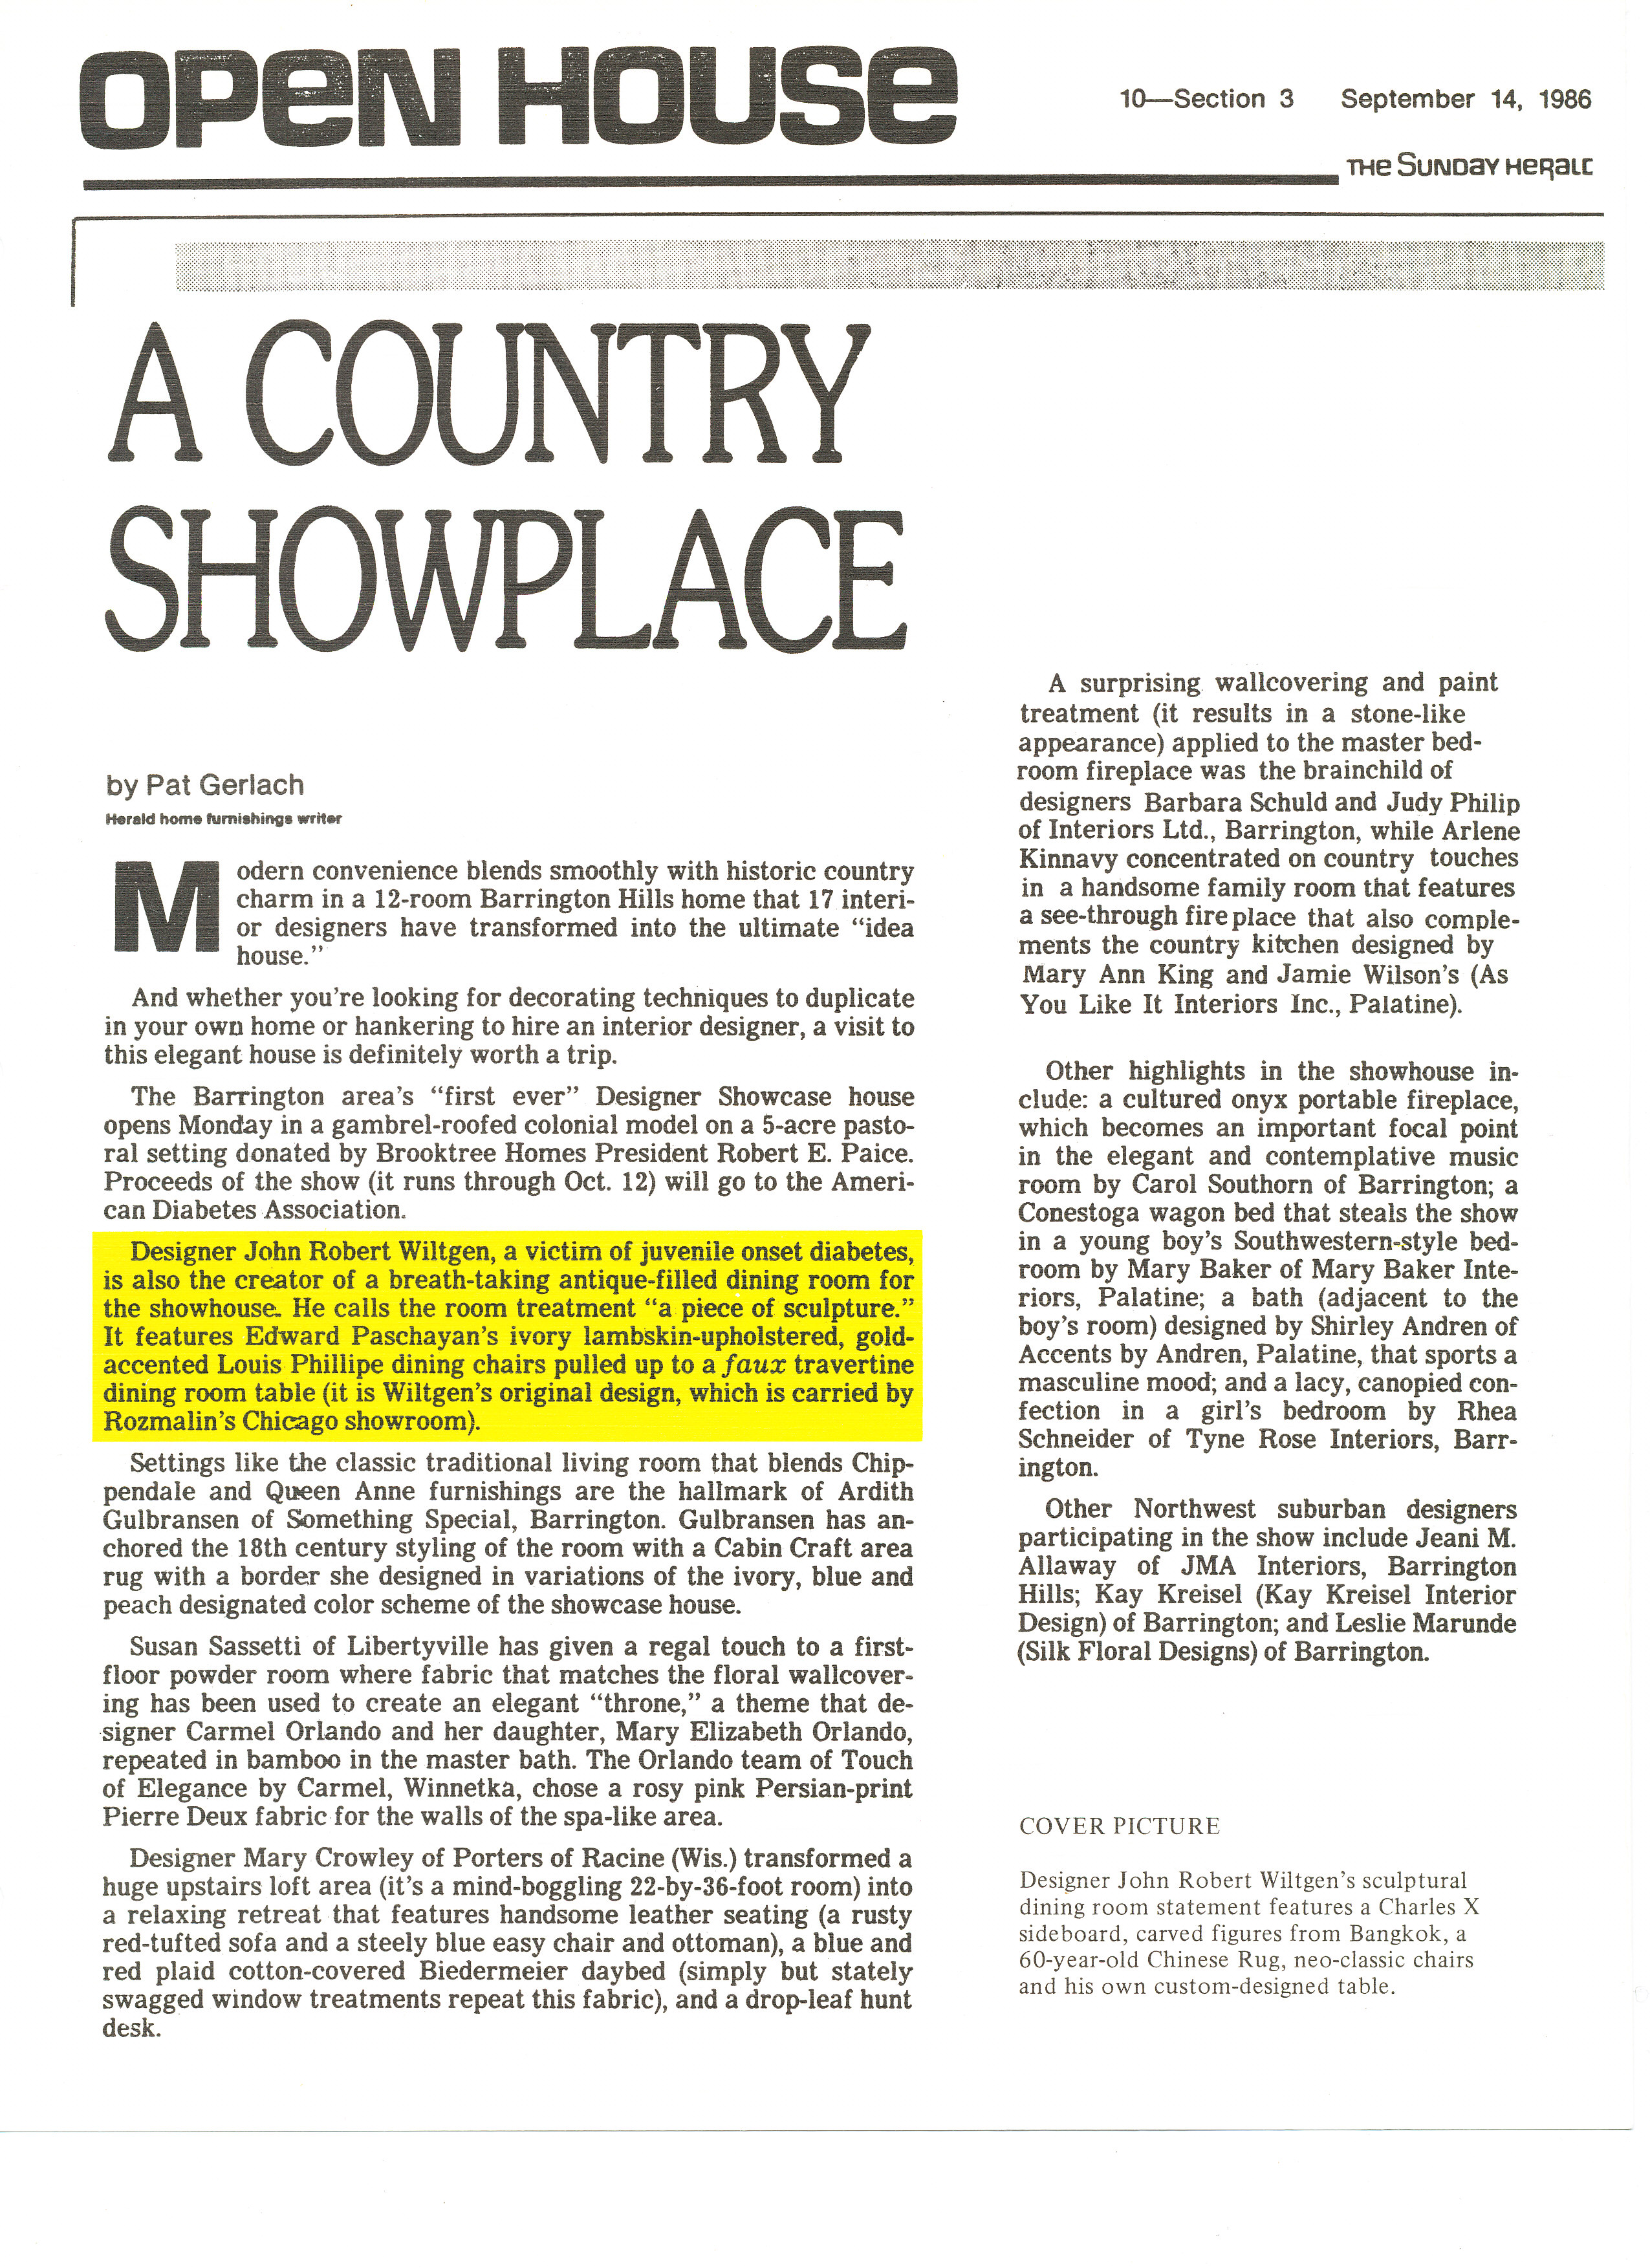 A Country Showplace (2)